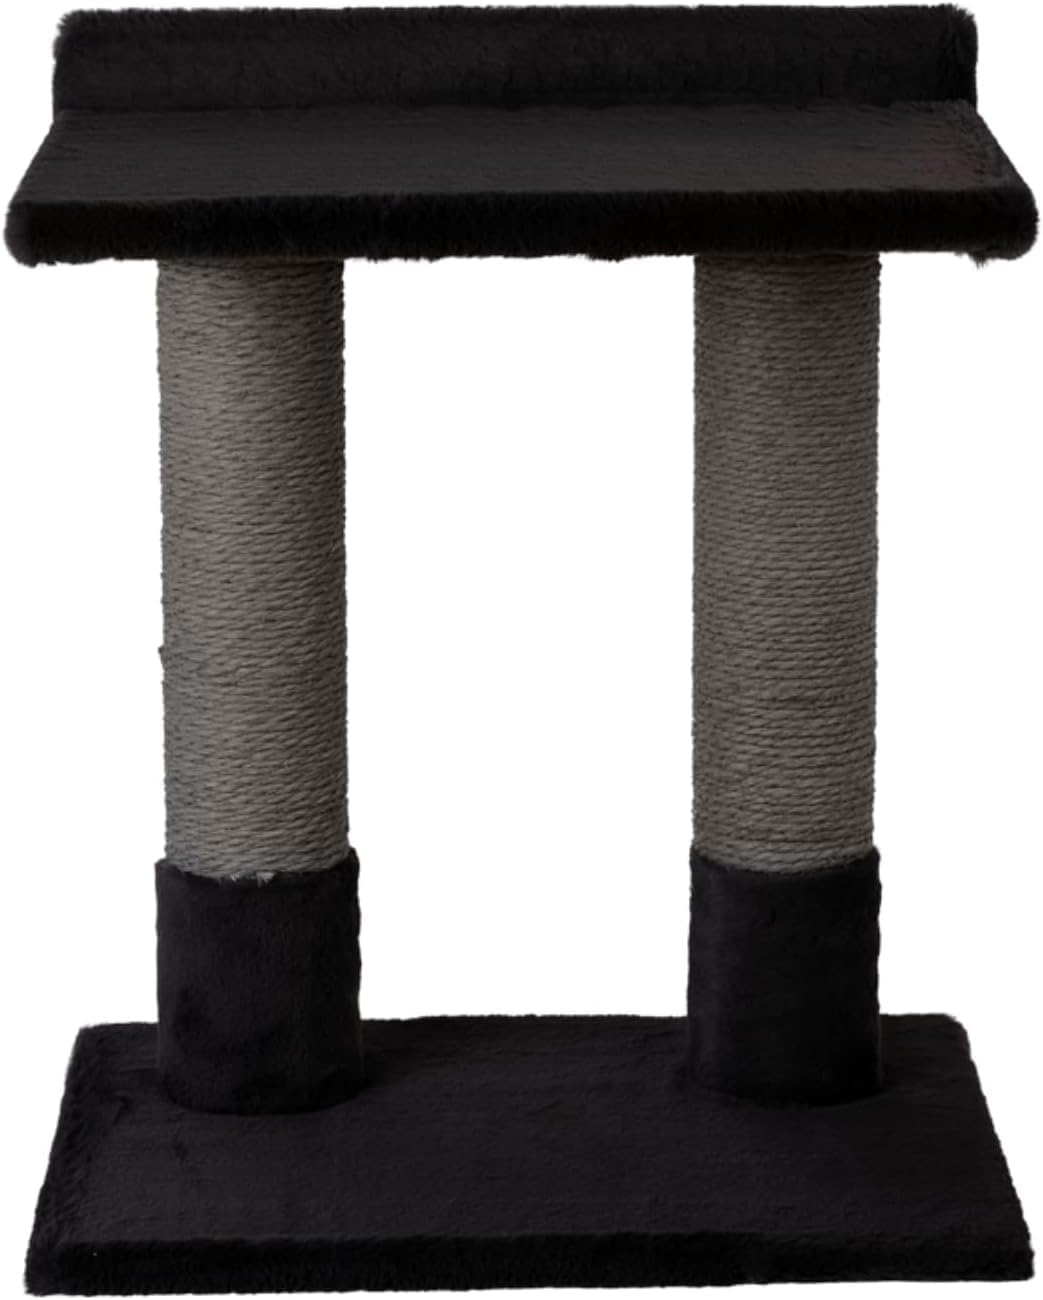 24 Inch Classic Comfort for Indoor Modern Premium Cats and Kittens Scratcher Larger Base for Better Stability, (Black, Charcoal)